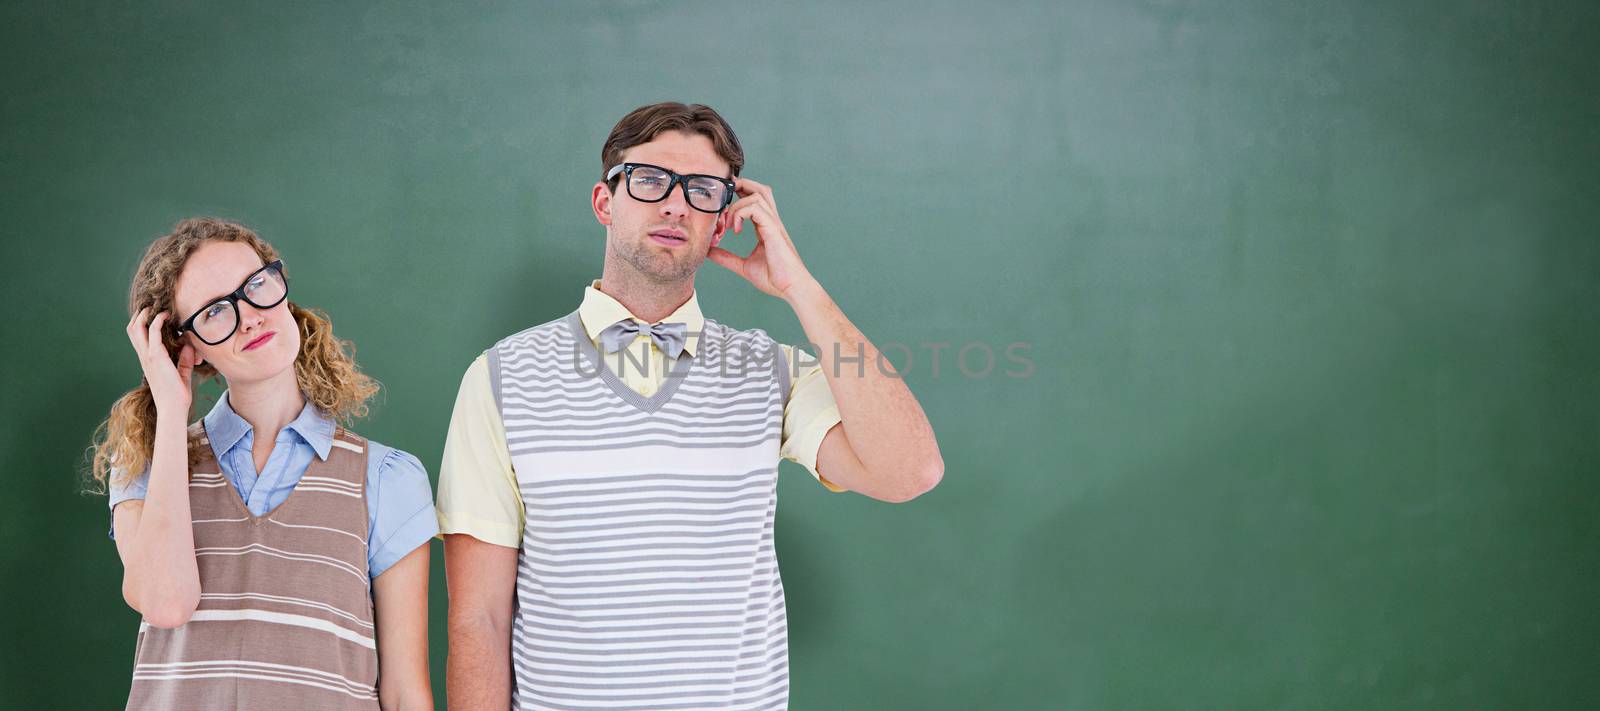 Geeky hipster couple thinking with hand on temple against green chalkboard